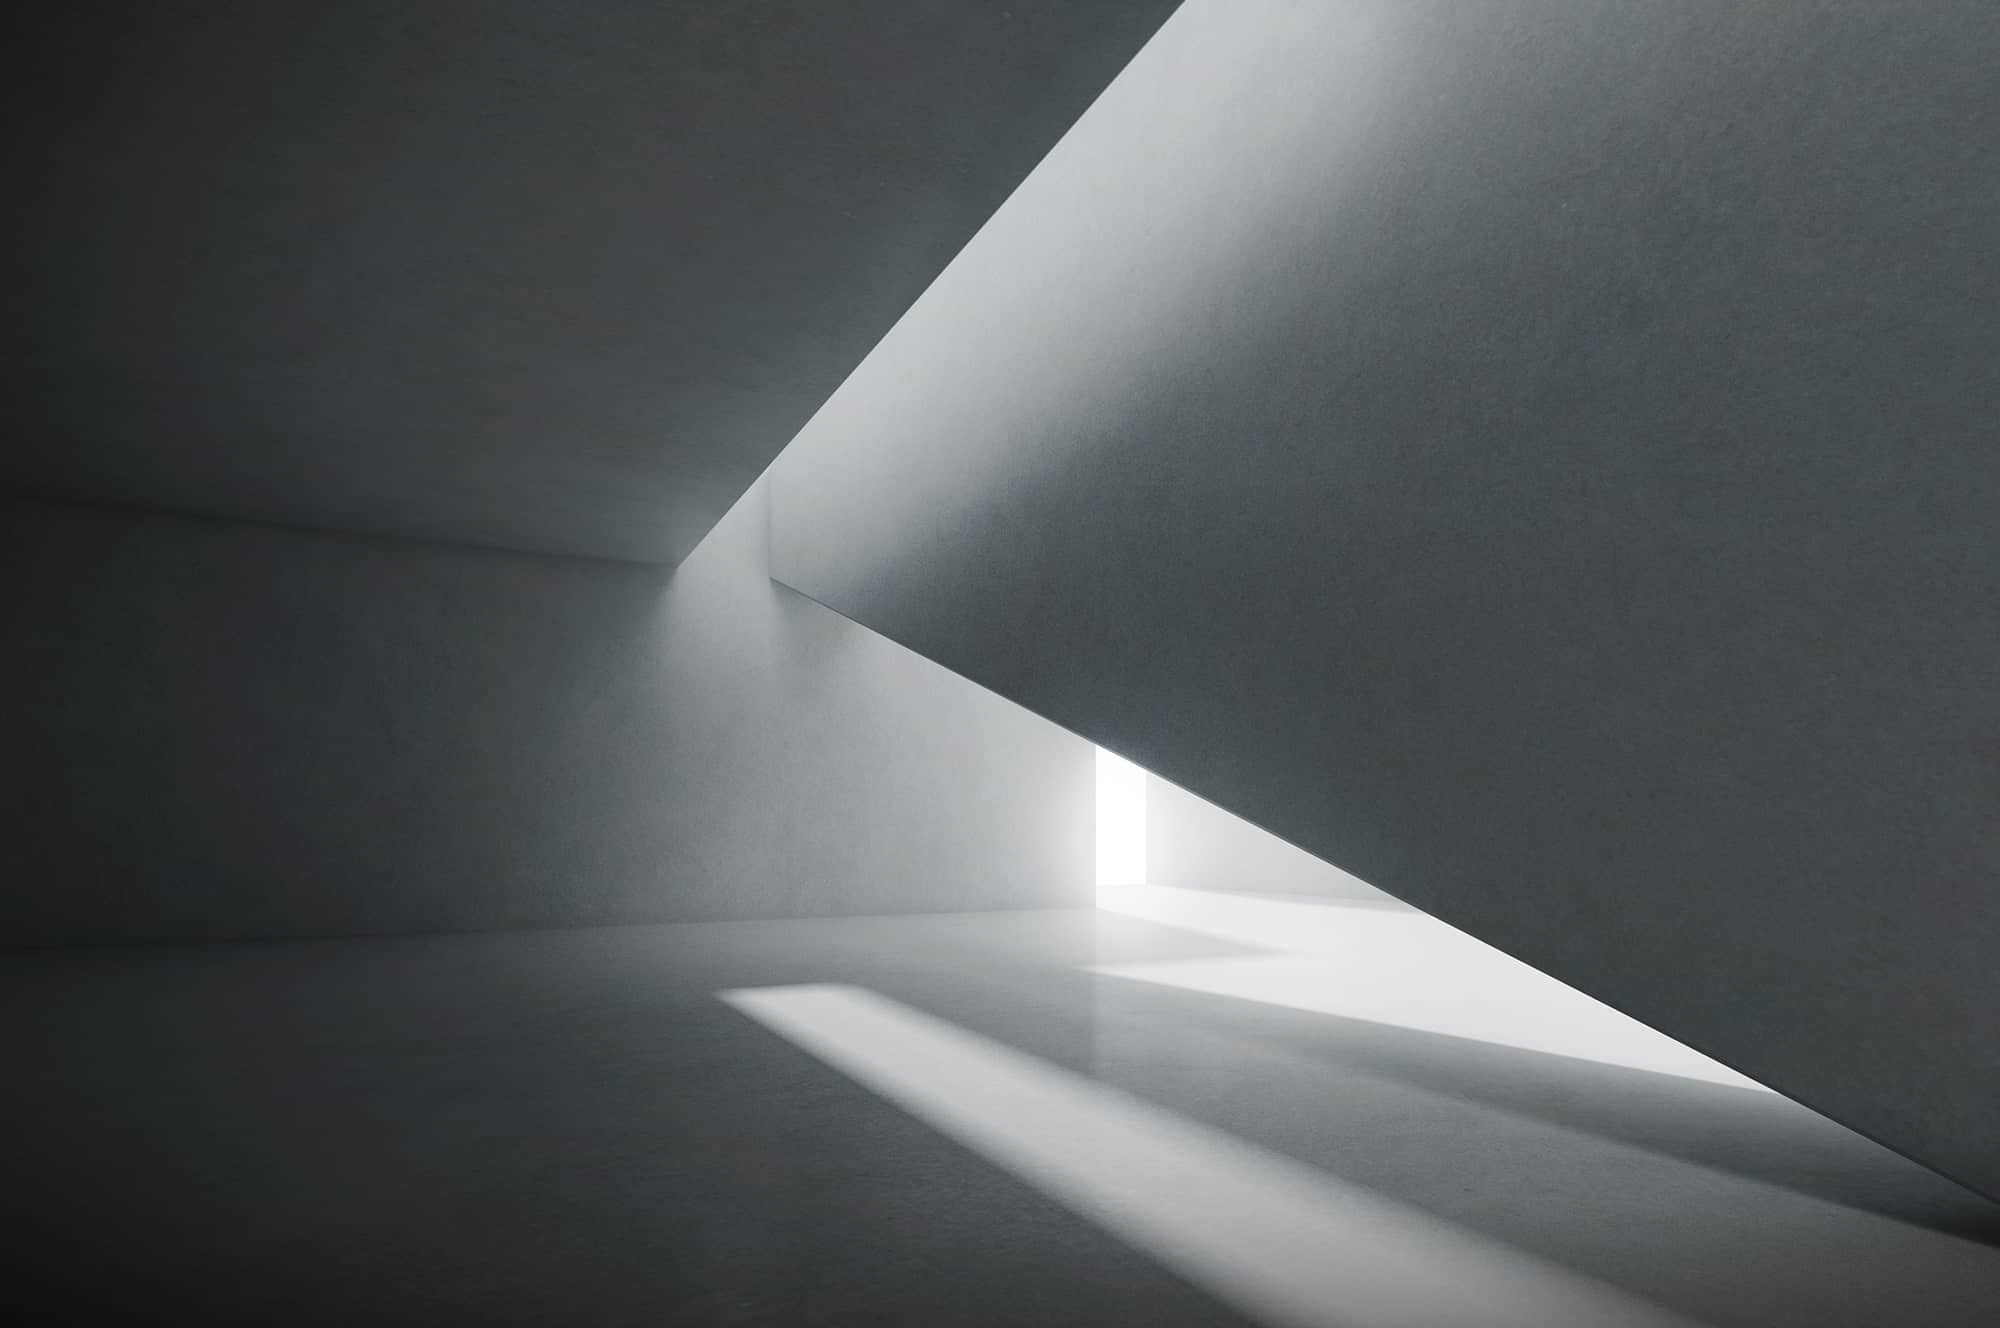 Abstract architectural interior with natural light casting geometric shadows.